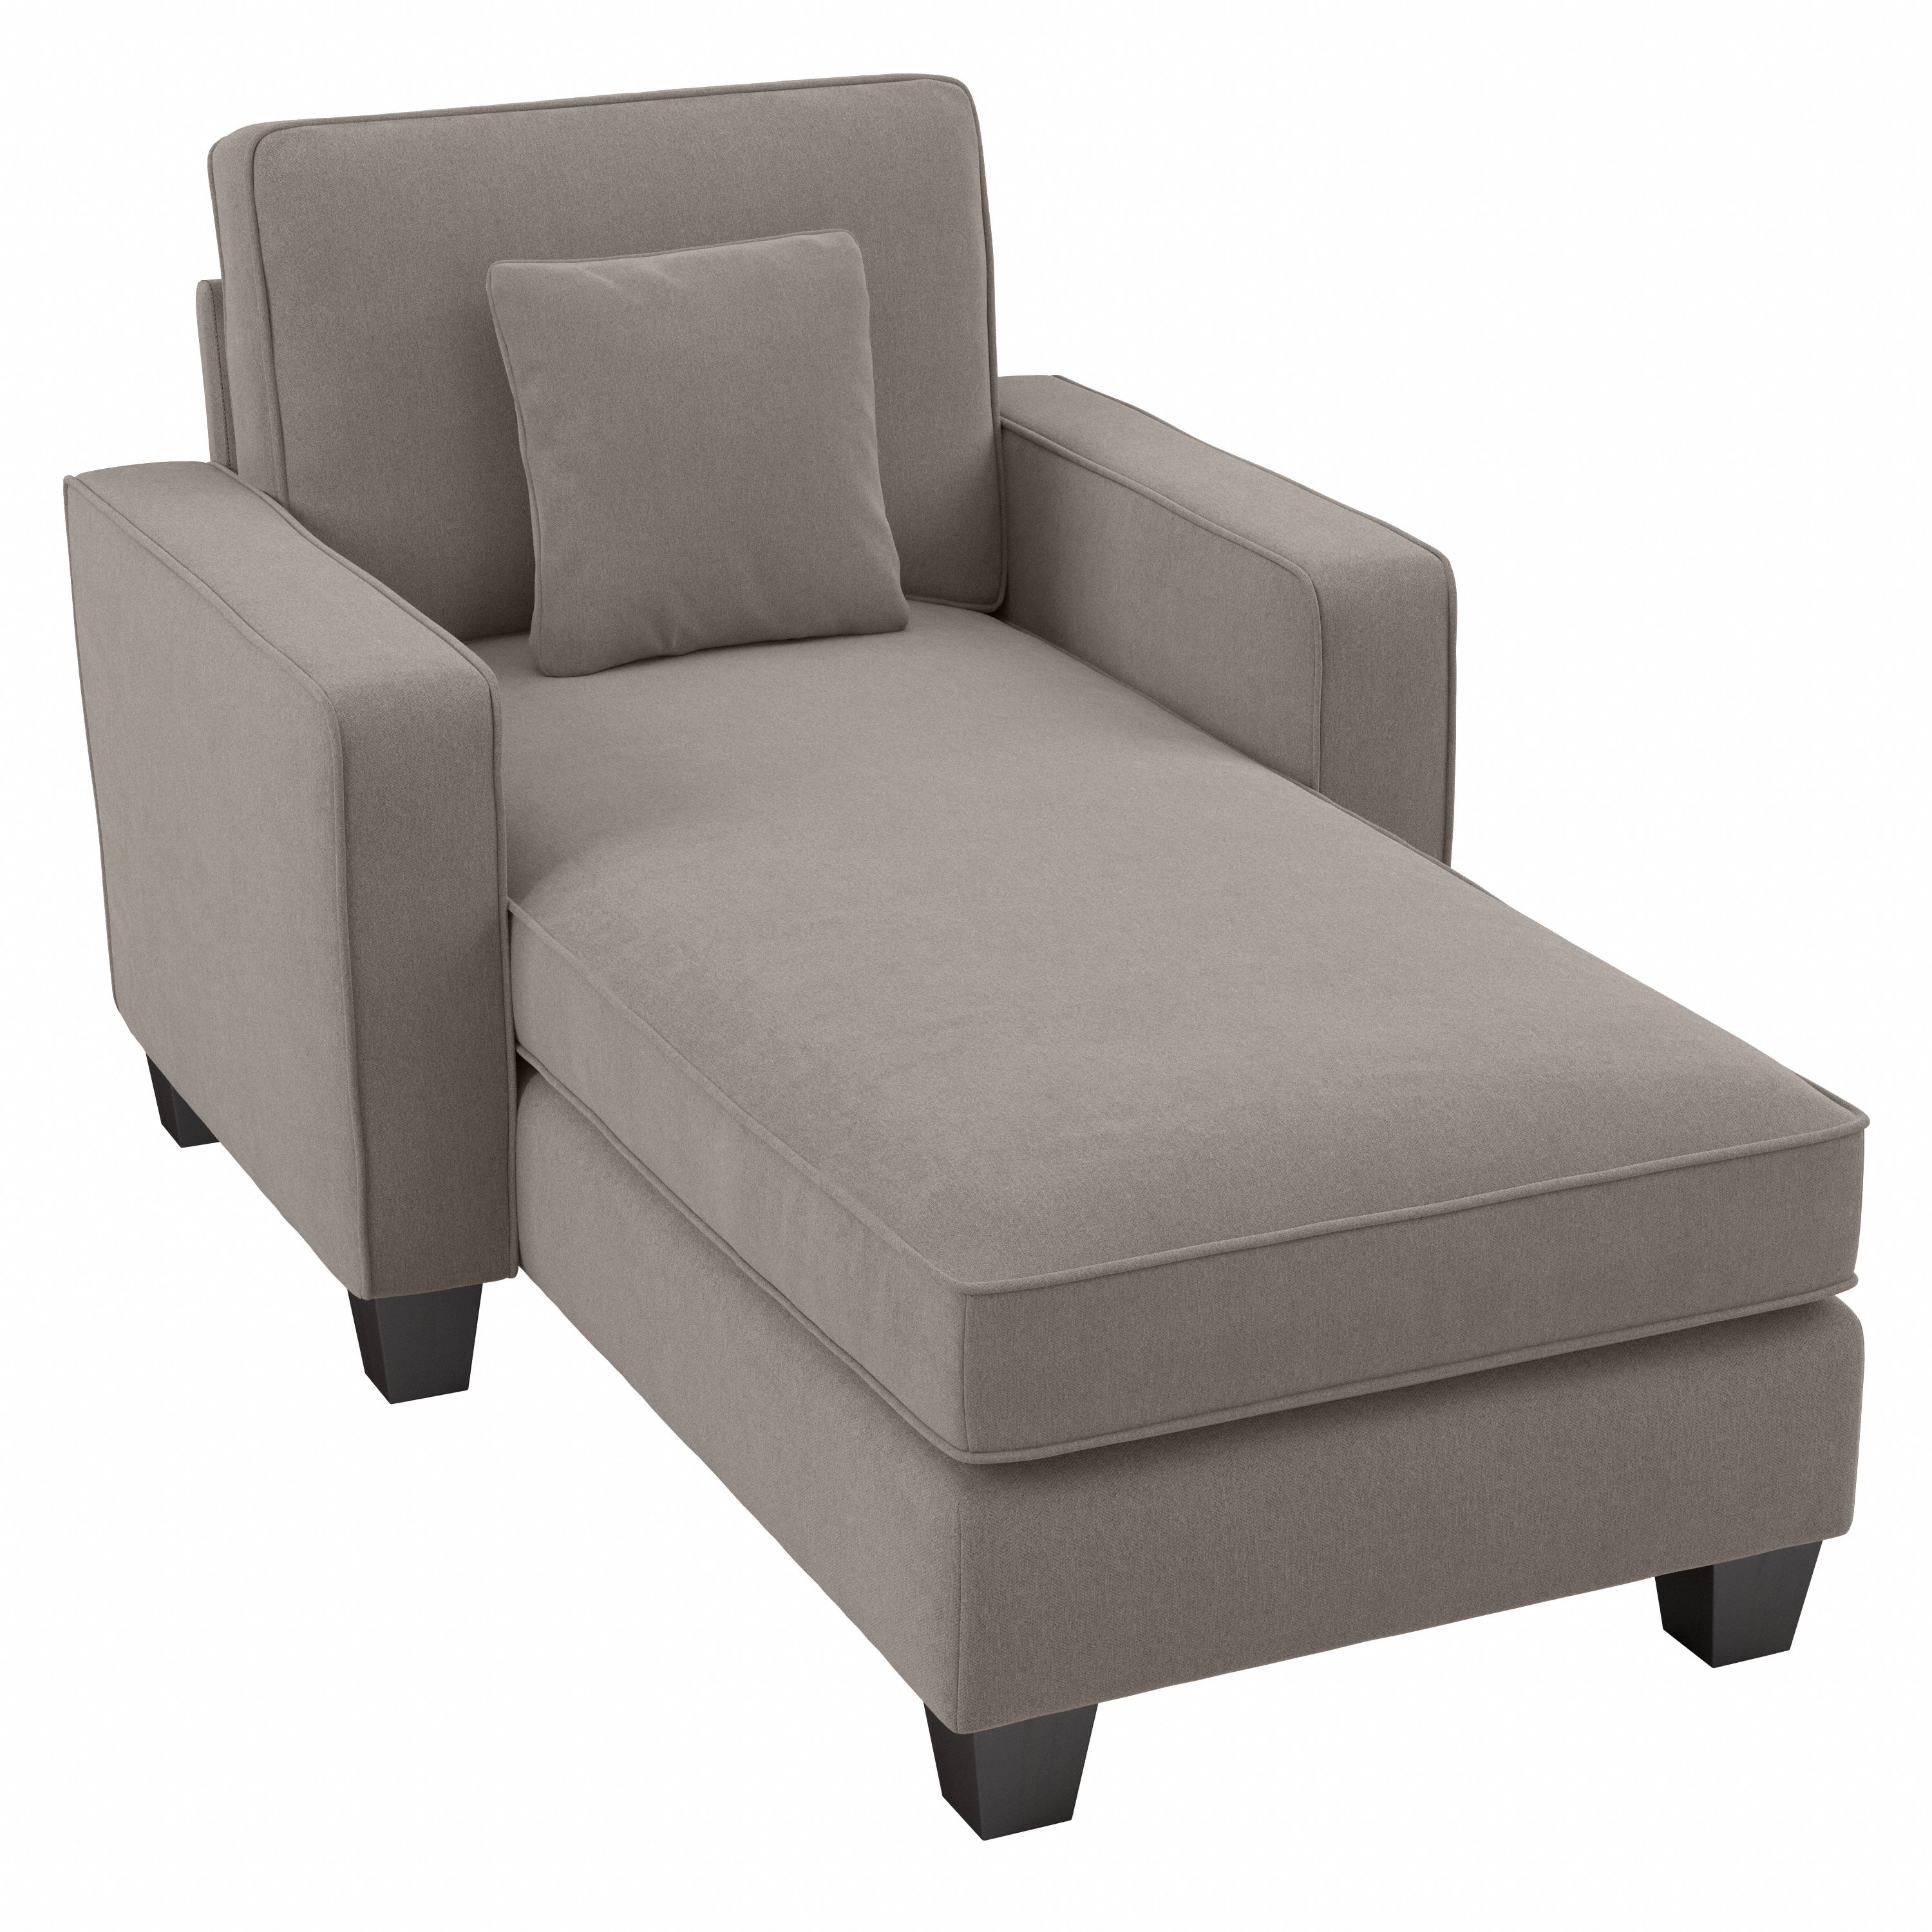 Shop Bush Furniture Stockton Chaise Lounge with Arms 02 SNM41SBGH-03K #color_beige herringbone fabric